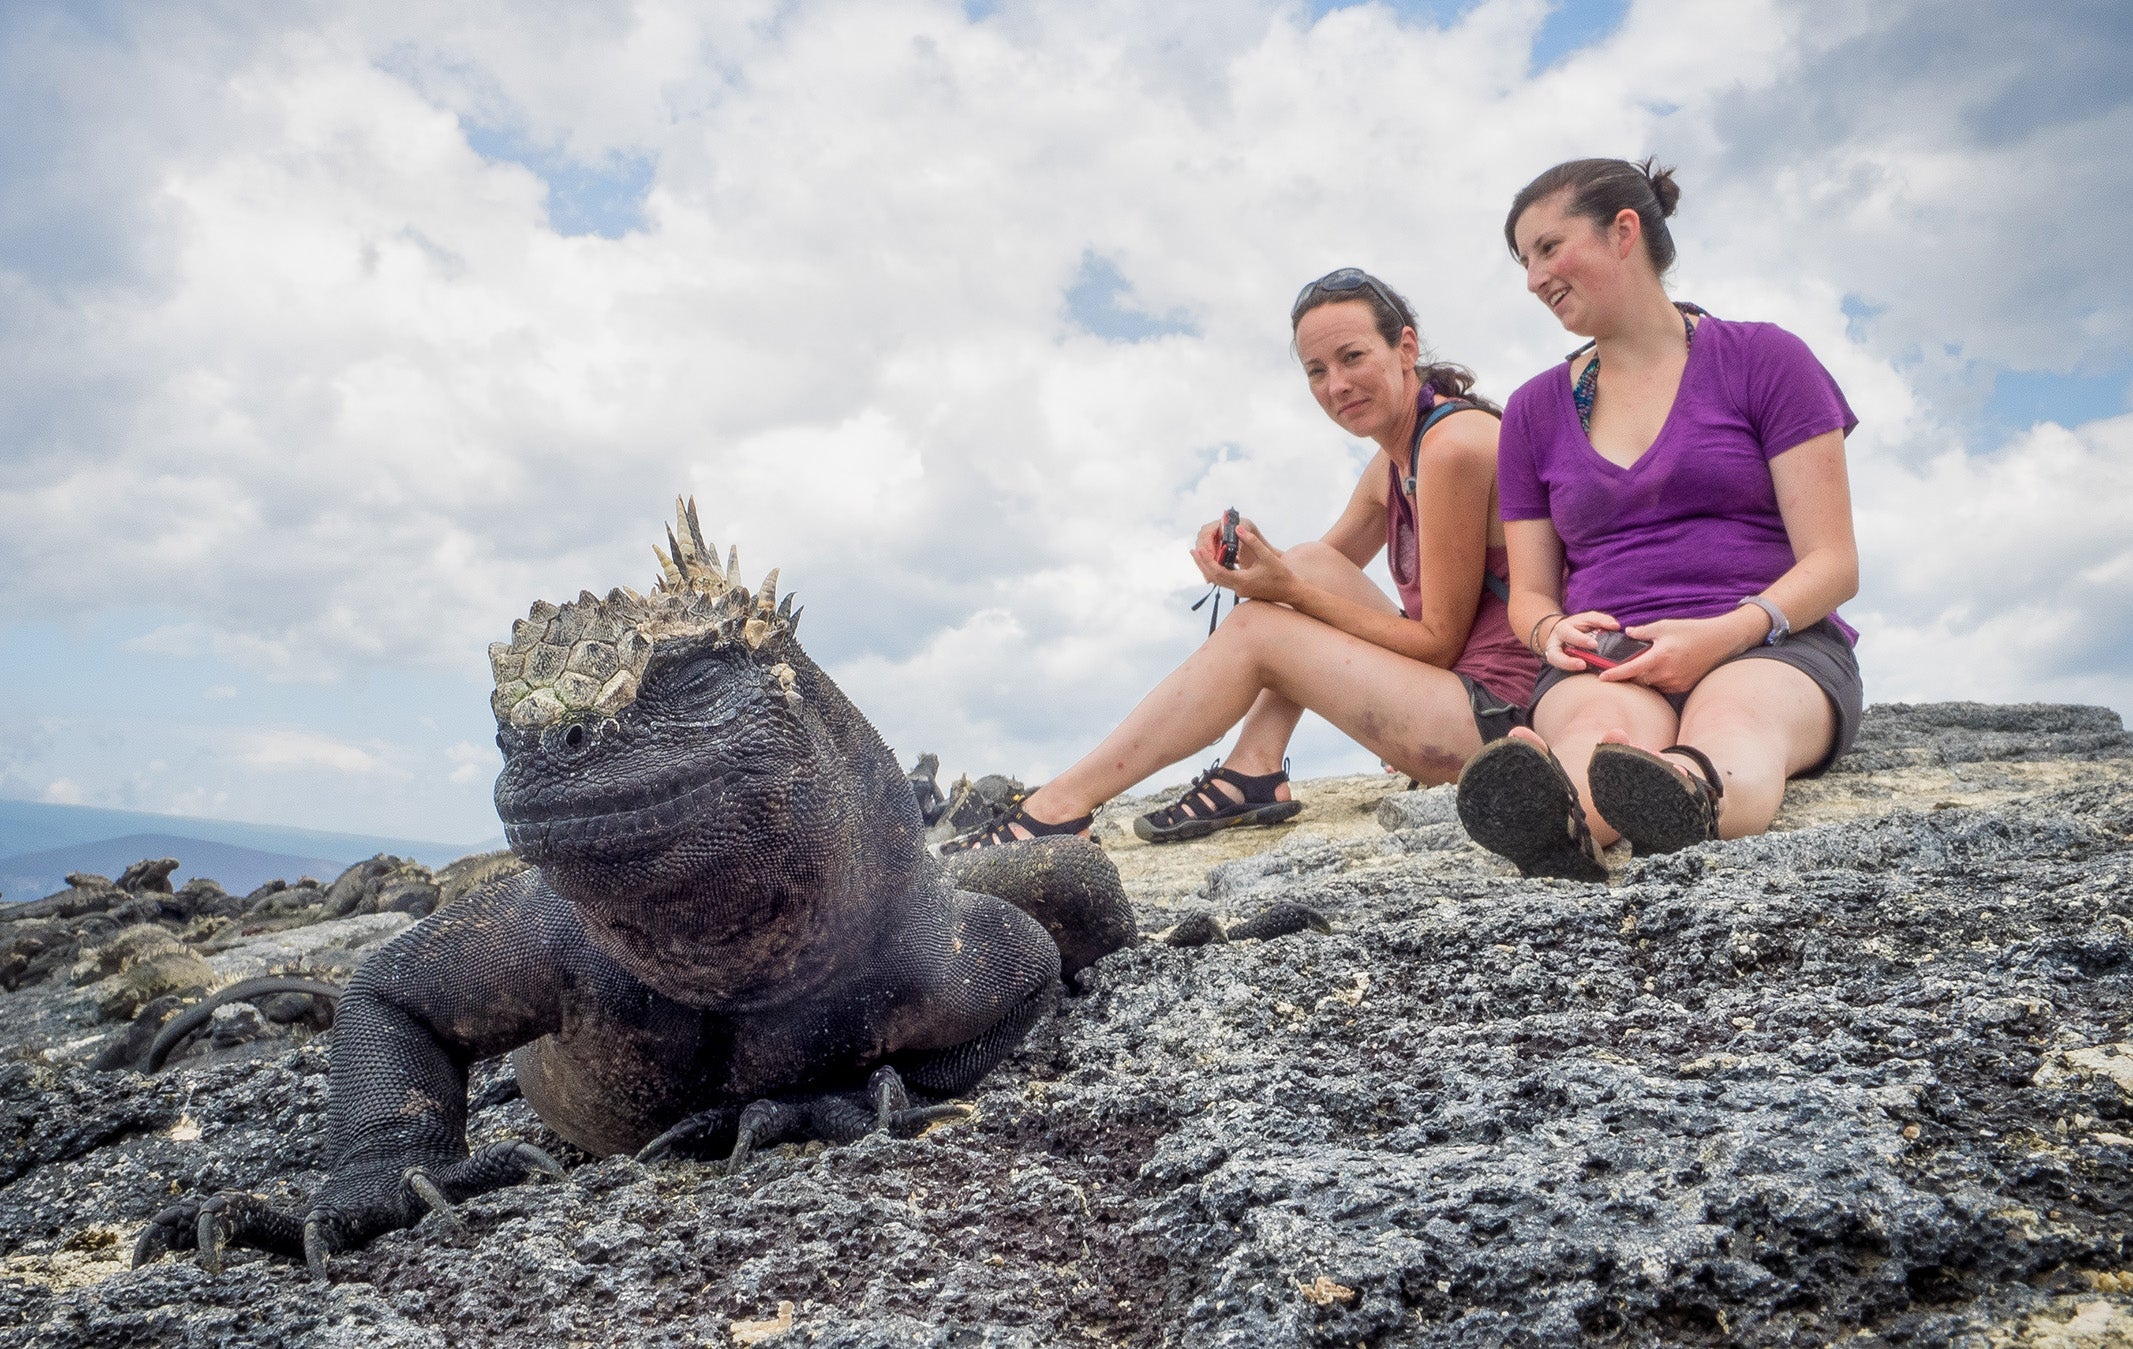 students on Galapagos Field Trip with marine iguana in foreground